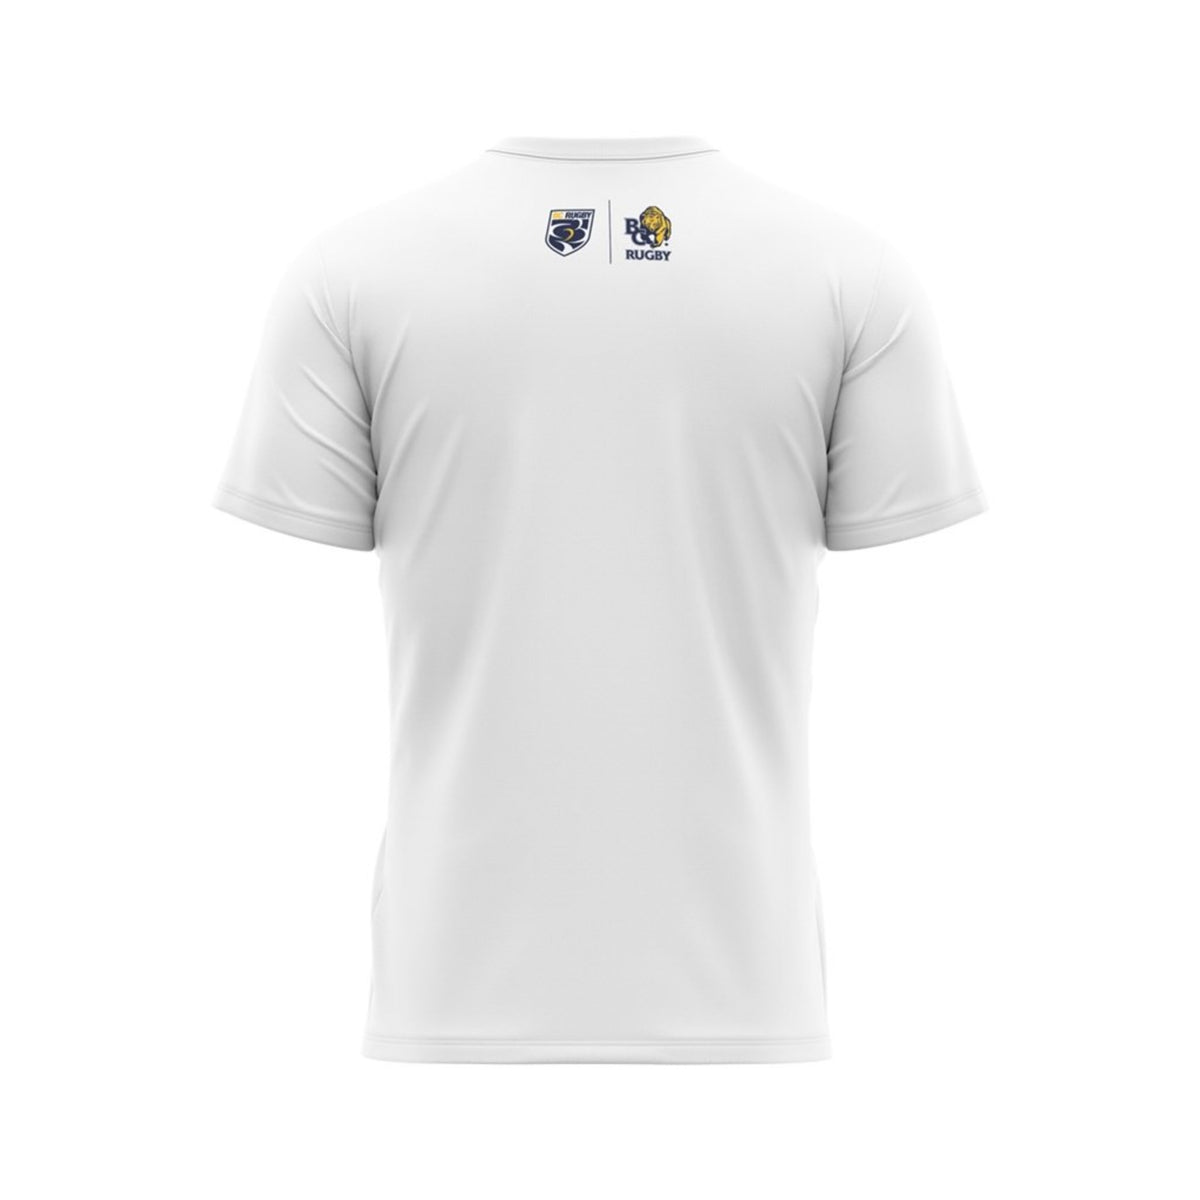 BC Rugby 2022 Shield Tee - www.therugbyshop.com www.therugbyshop.com XIX Brands TEES BC Rugby 2022 Shield Tee